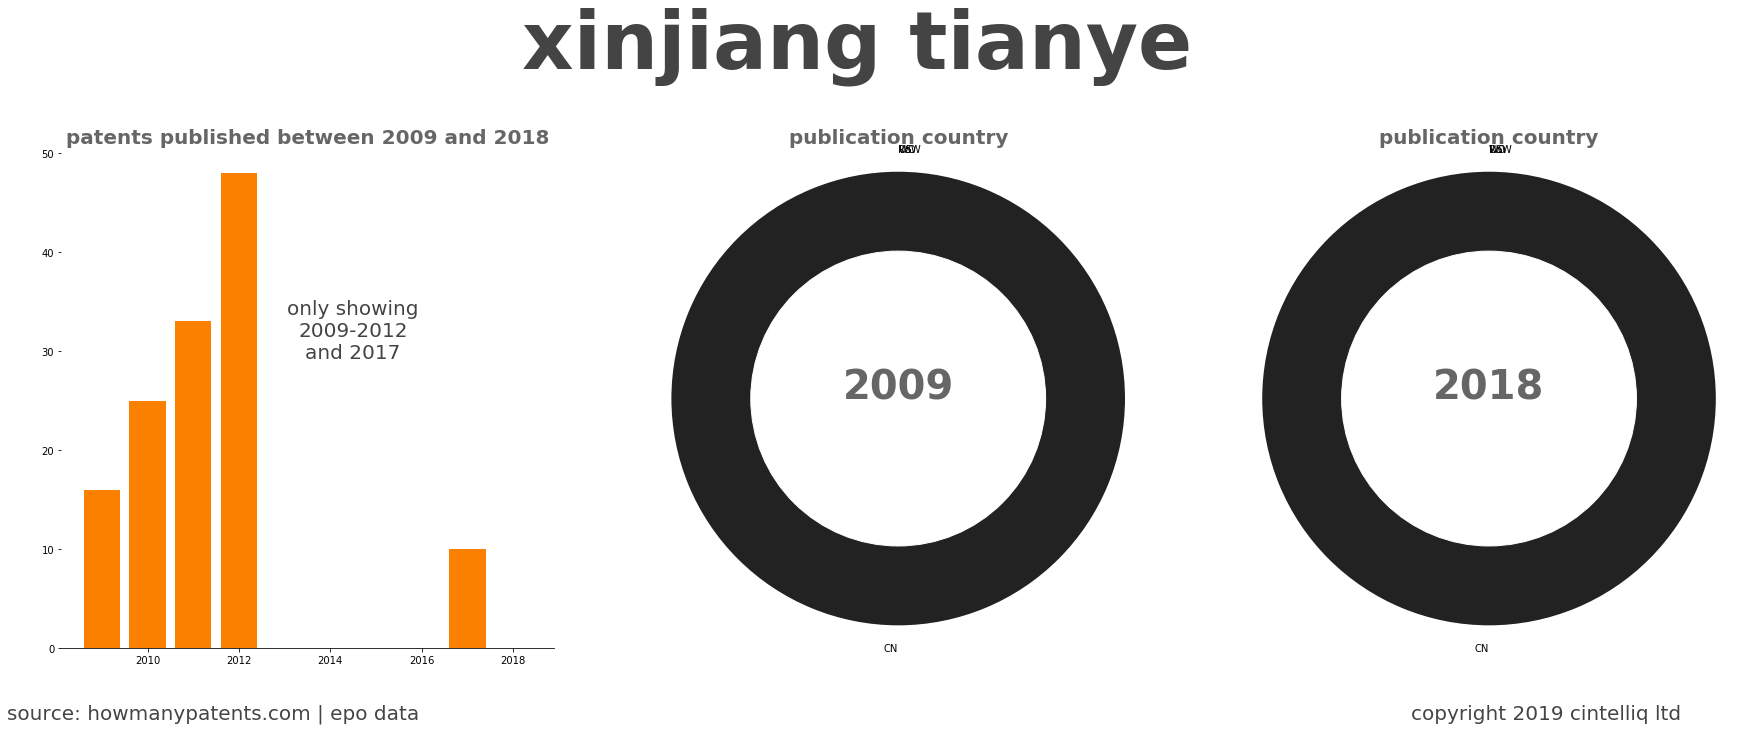 summary of patents for Xinjiang Tianye 